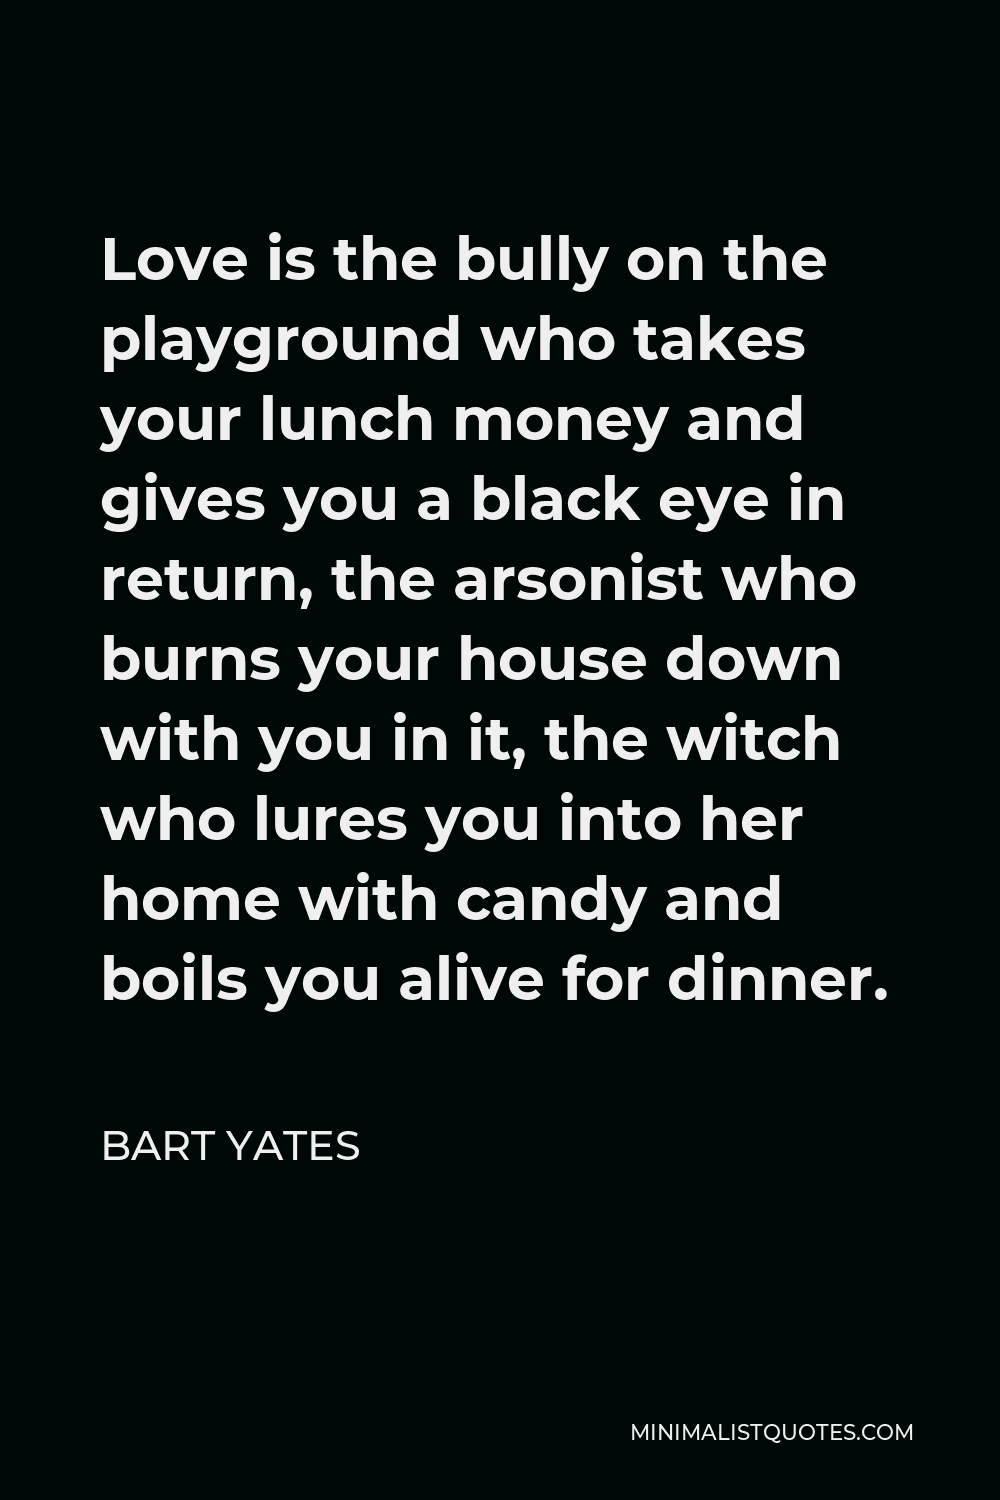 Bart Yates Quote - Love is the bully on the playground who takes your lunch money and gives you a black eye in return, the arsonist who burns your house down with you in it, the witch who lures you into her home with candy and boils you alive for dinner.